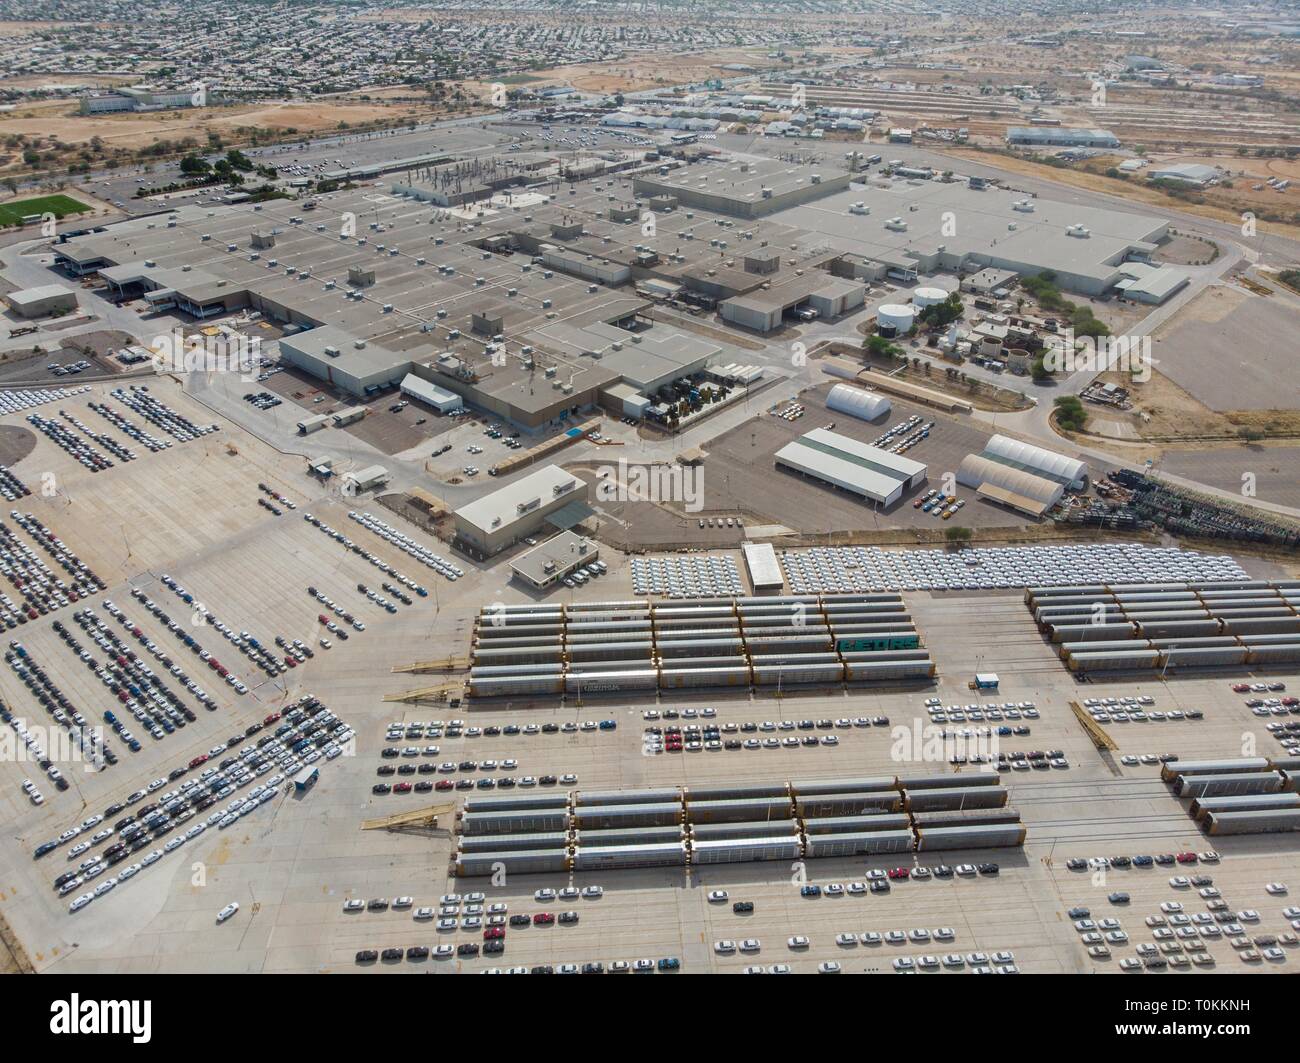 Aerial view of the Ford Motor Company automotive company in the Hermosillo industrial park. Automotive industry. Hermosillo Stamping and Assembly is an automobile assembly plant of Ford Motor Company located in Hermosillo, Sonora, Mexico. The plant currently assembles the Ford Fusion and Lincoln MKZ, Lincoln models for the North American market. Ford is an American multinational automaker . Photo: (NortePhoto / LuisGutierrez) ... keywords: dji, aerial, djimavic, mavicair, aerial photo, aerial photography, urban landscape, aerial photography, aerial photo, urban, urban, urban, plane, architectu Stock Photo